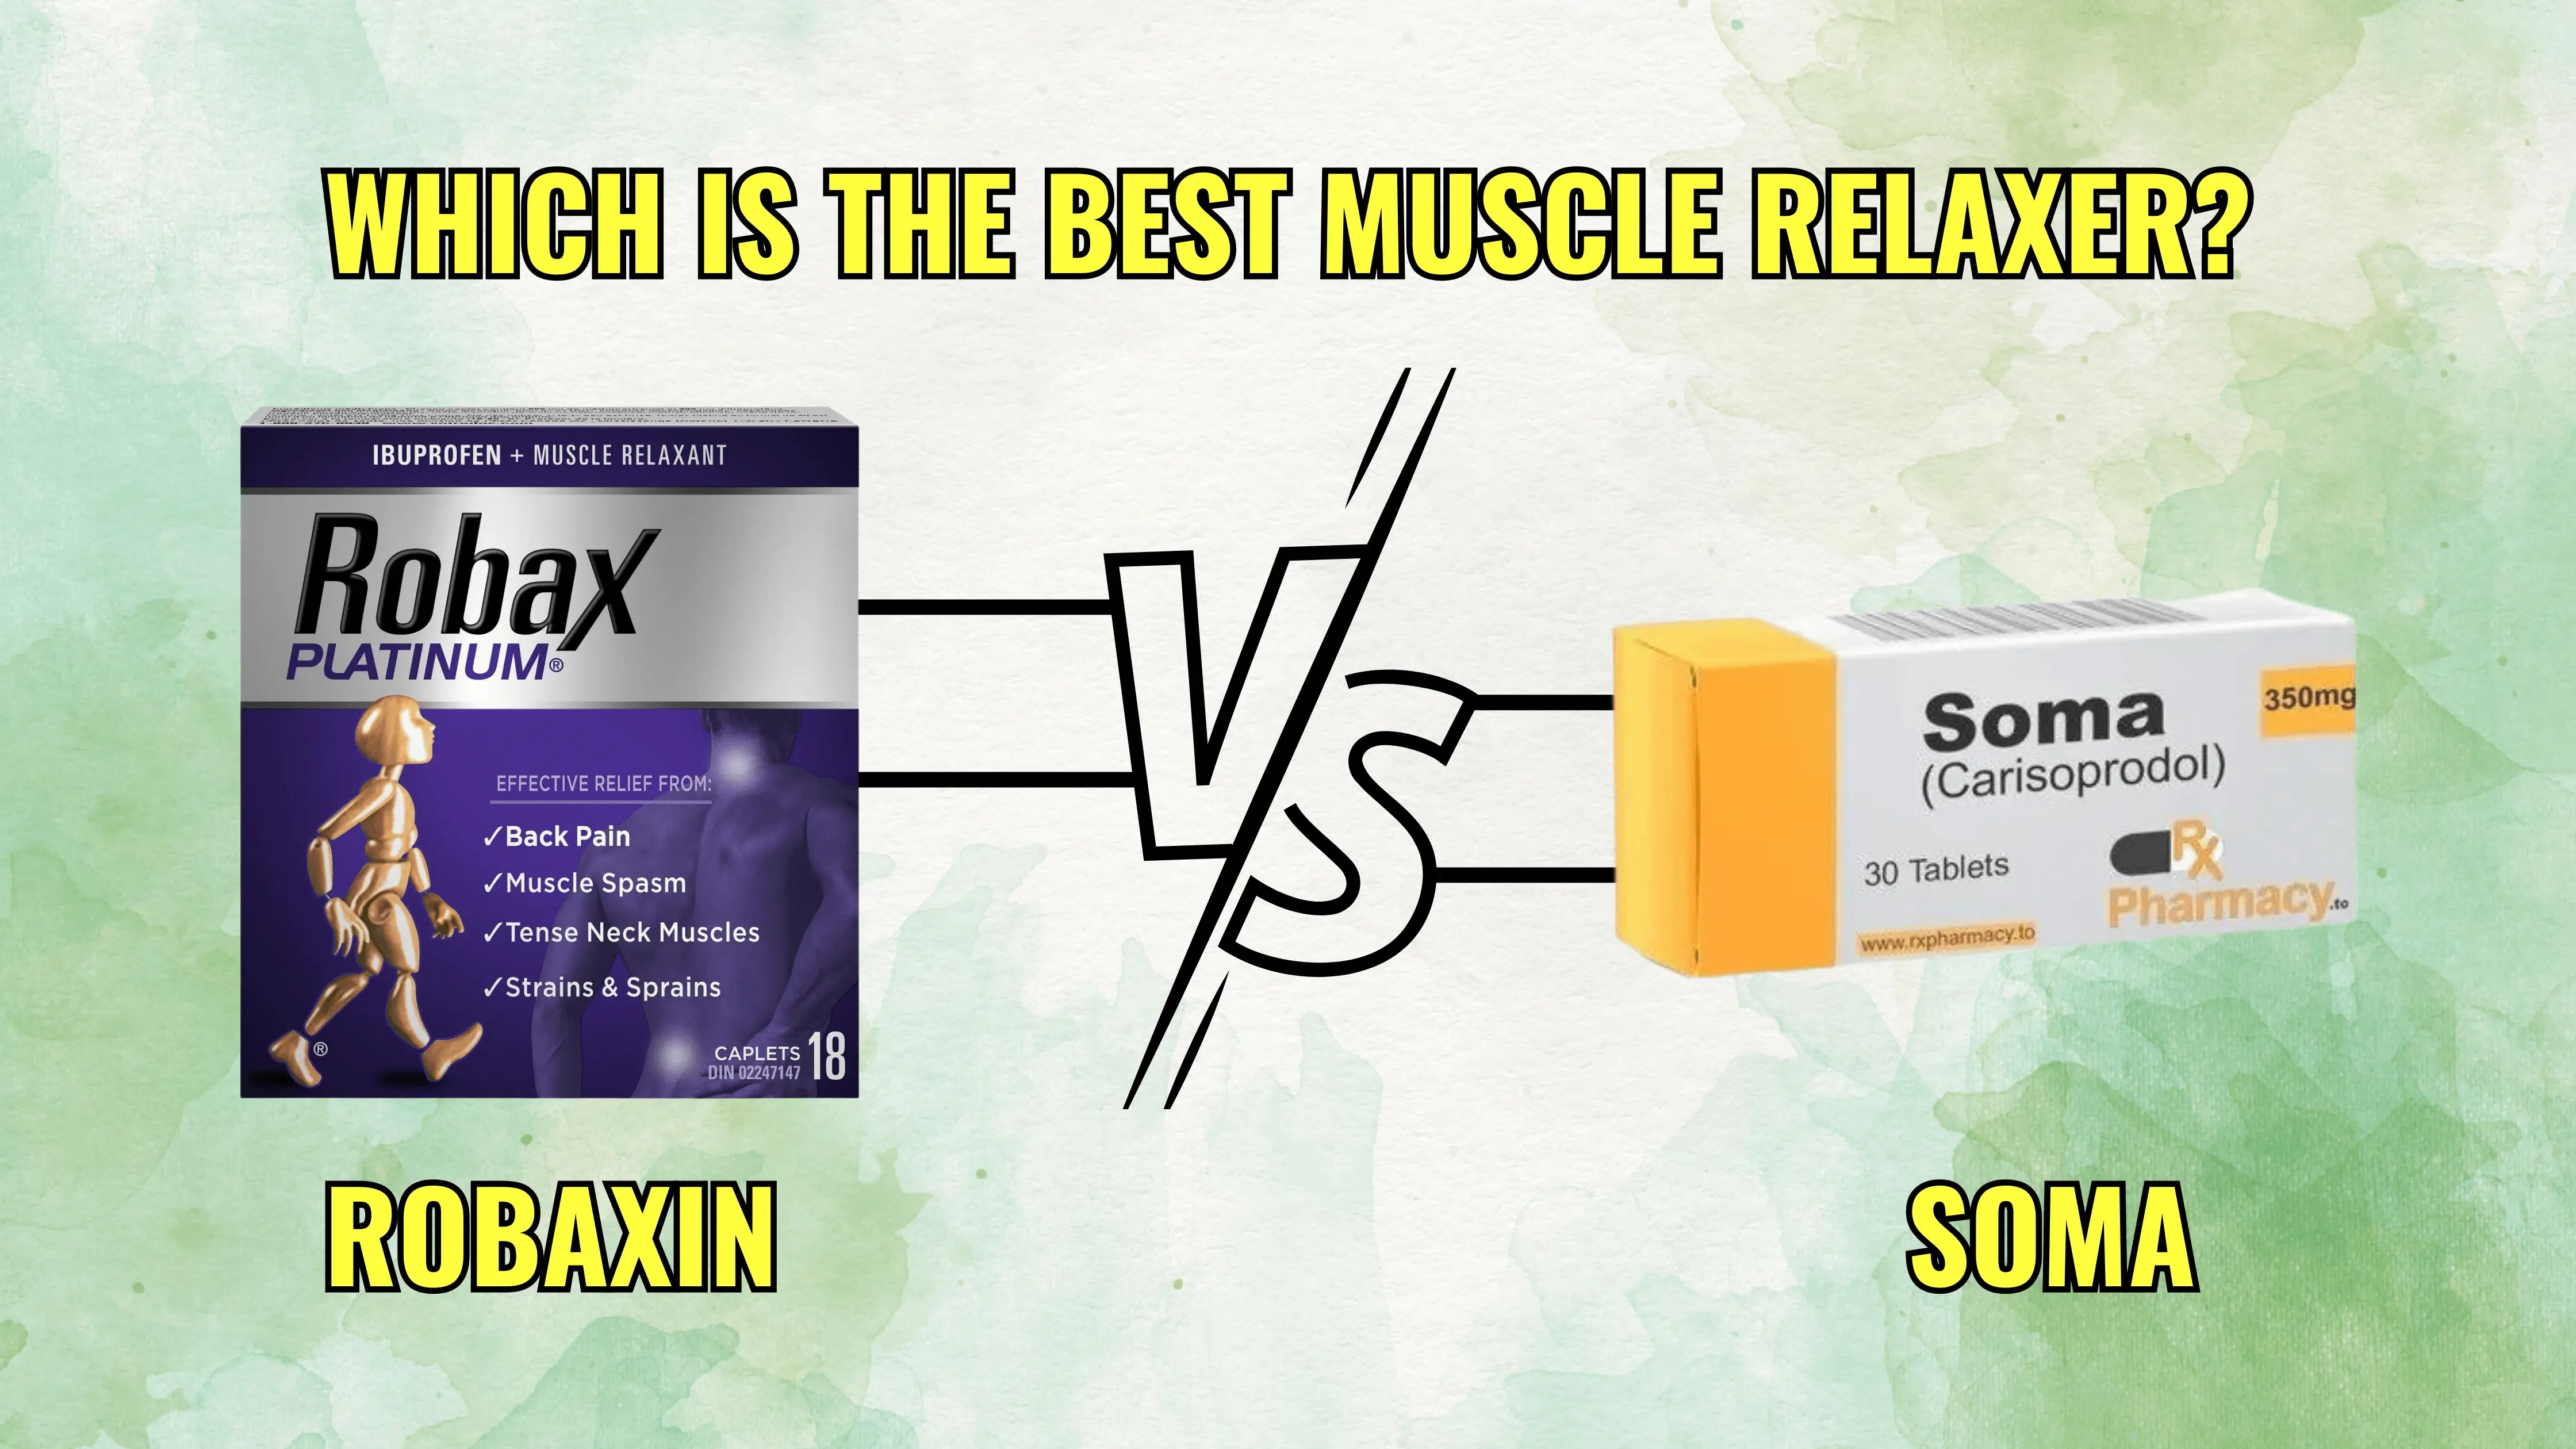 Robaxin Vs. Soma: Which is the Best Muscle Relaxer?